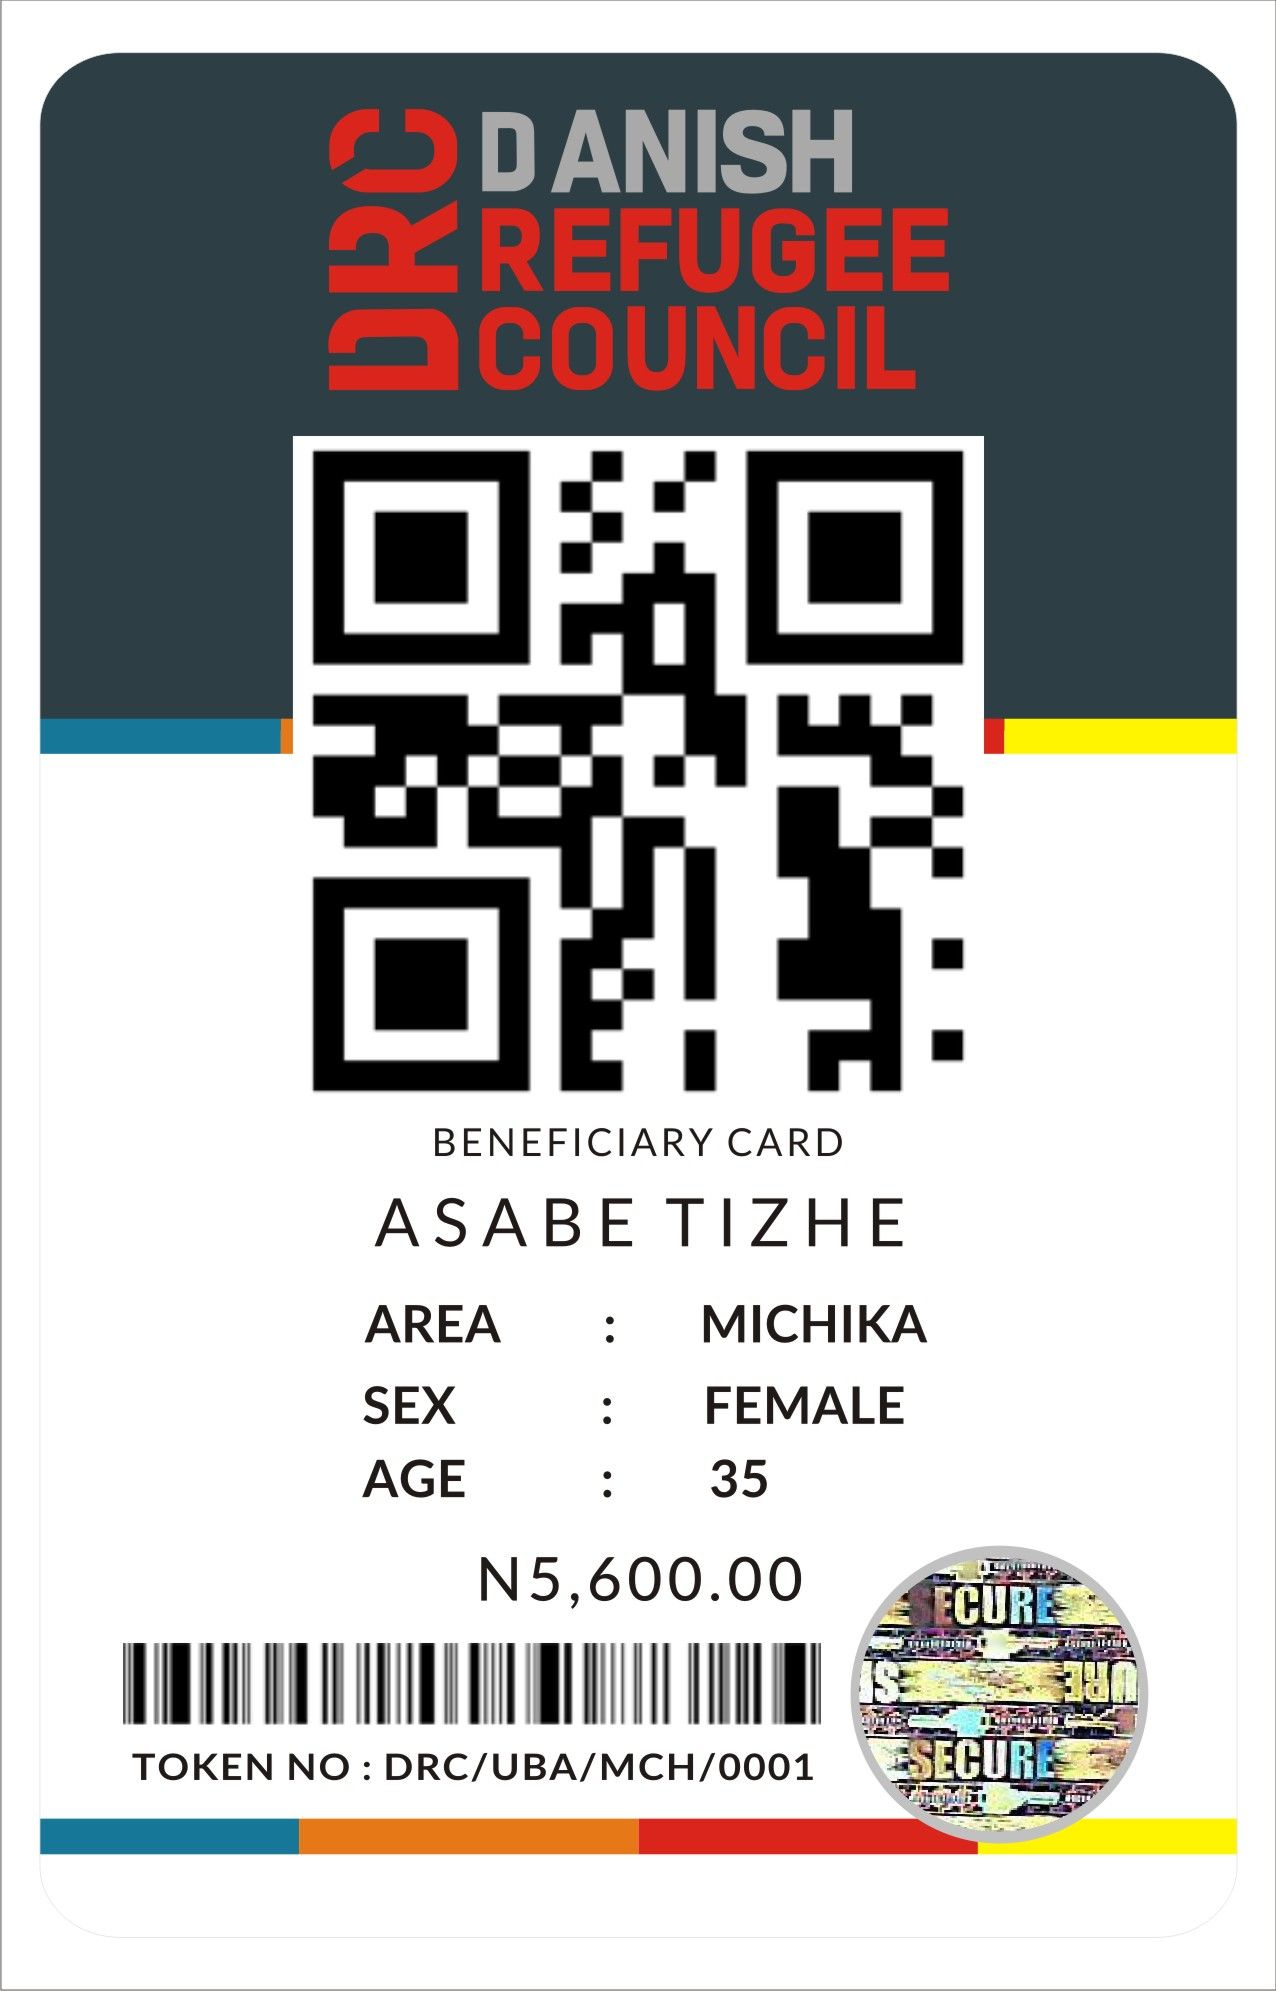 CALL CHINEDU ON 08179651585 TO PRINT CERTIFICATES WITH HOLOGRAPHIC FOIL AS WELL AS QR CODE AND BAR CODE STICKERS